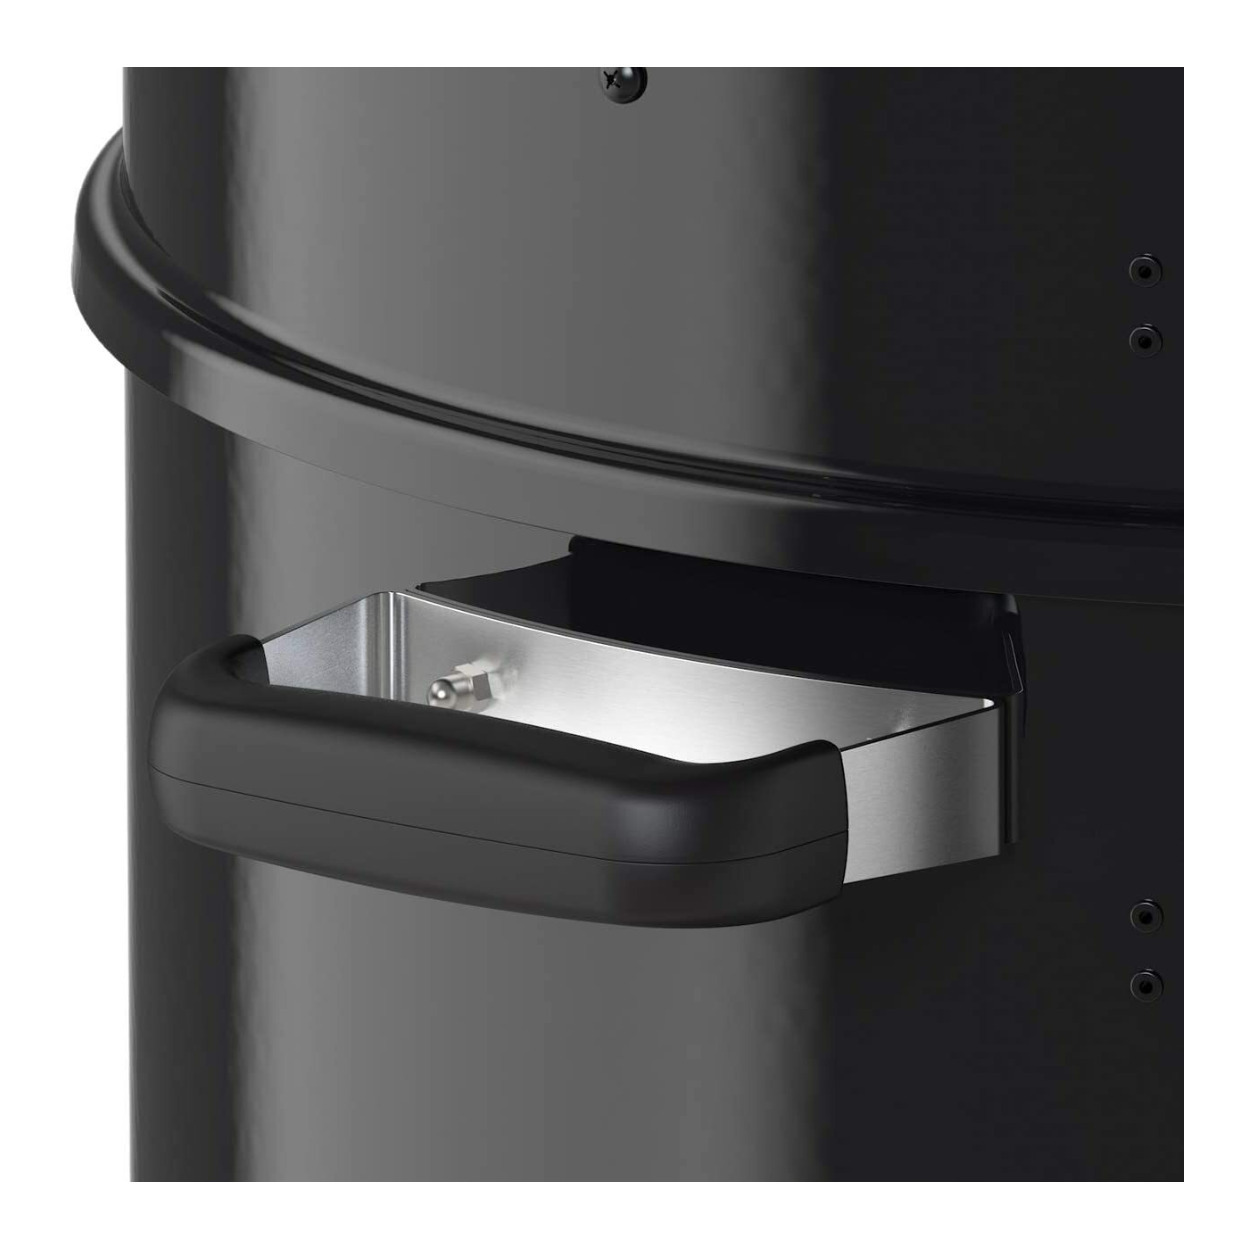 Rosle Charcoal Smoker No.1 F50-S convertible, Multi Grill, Barbecue, Smoker, Tailgater, camping, steamer - image 2 of 9